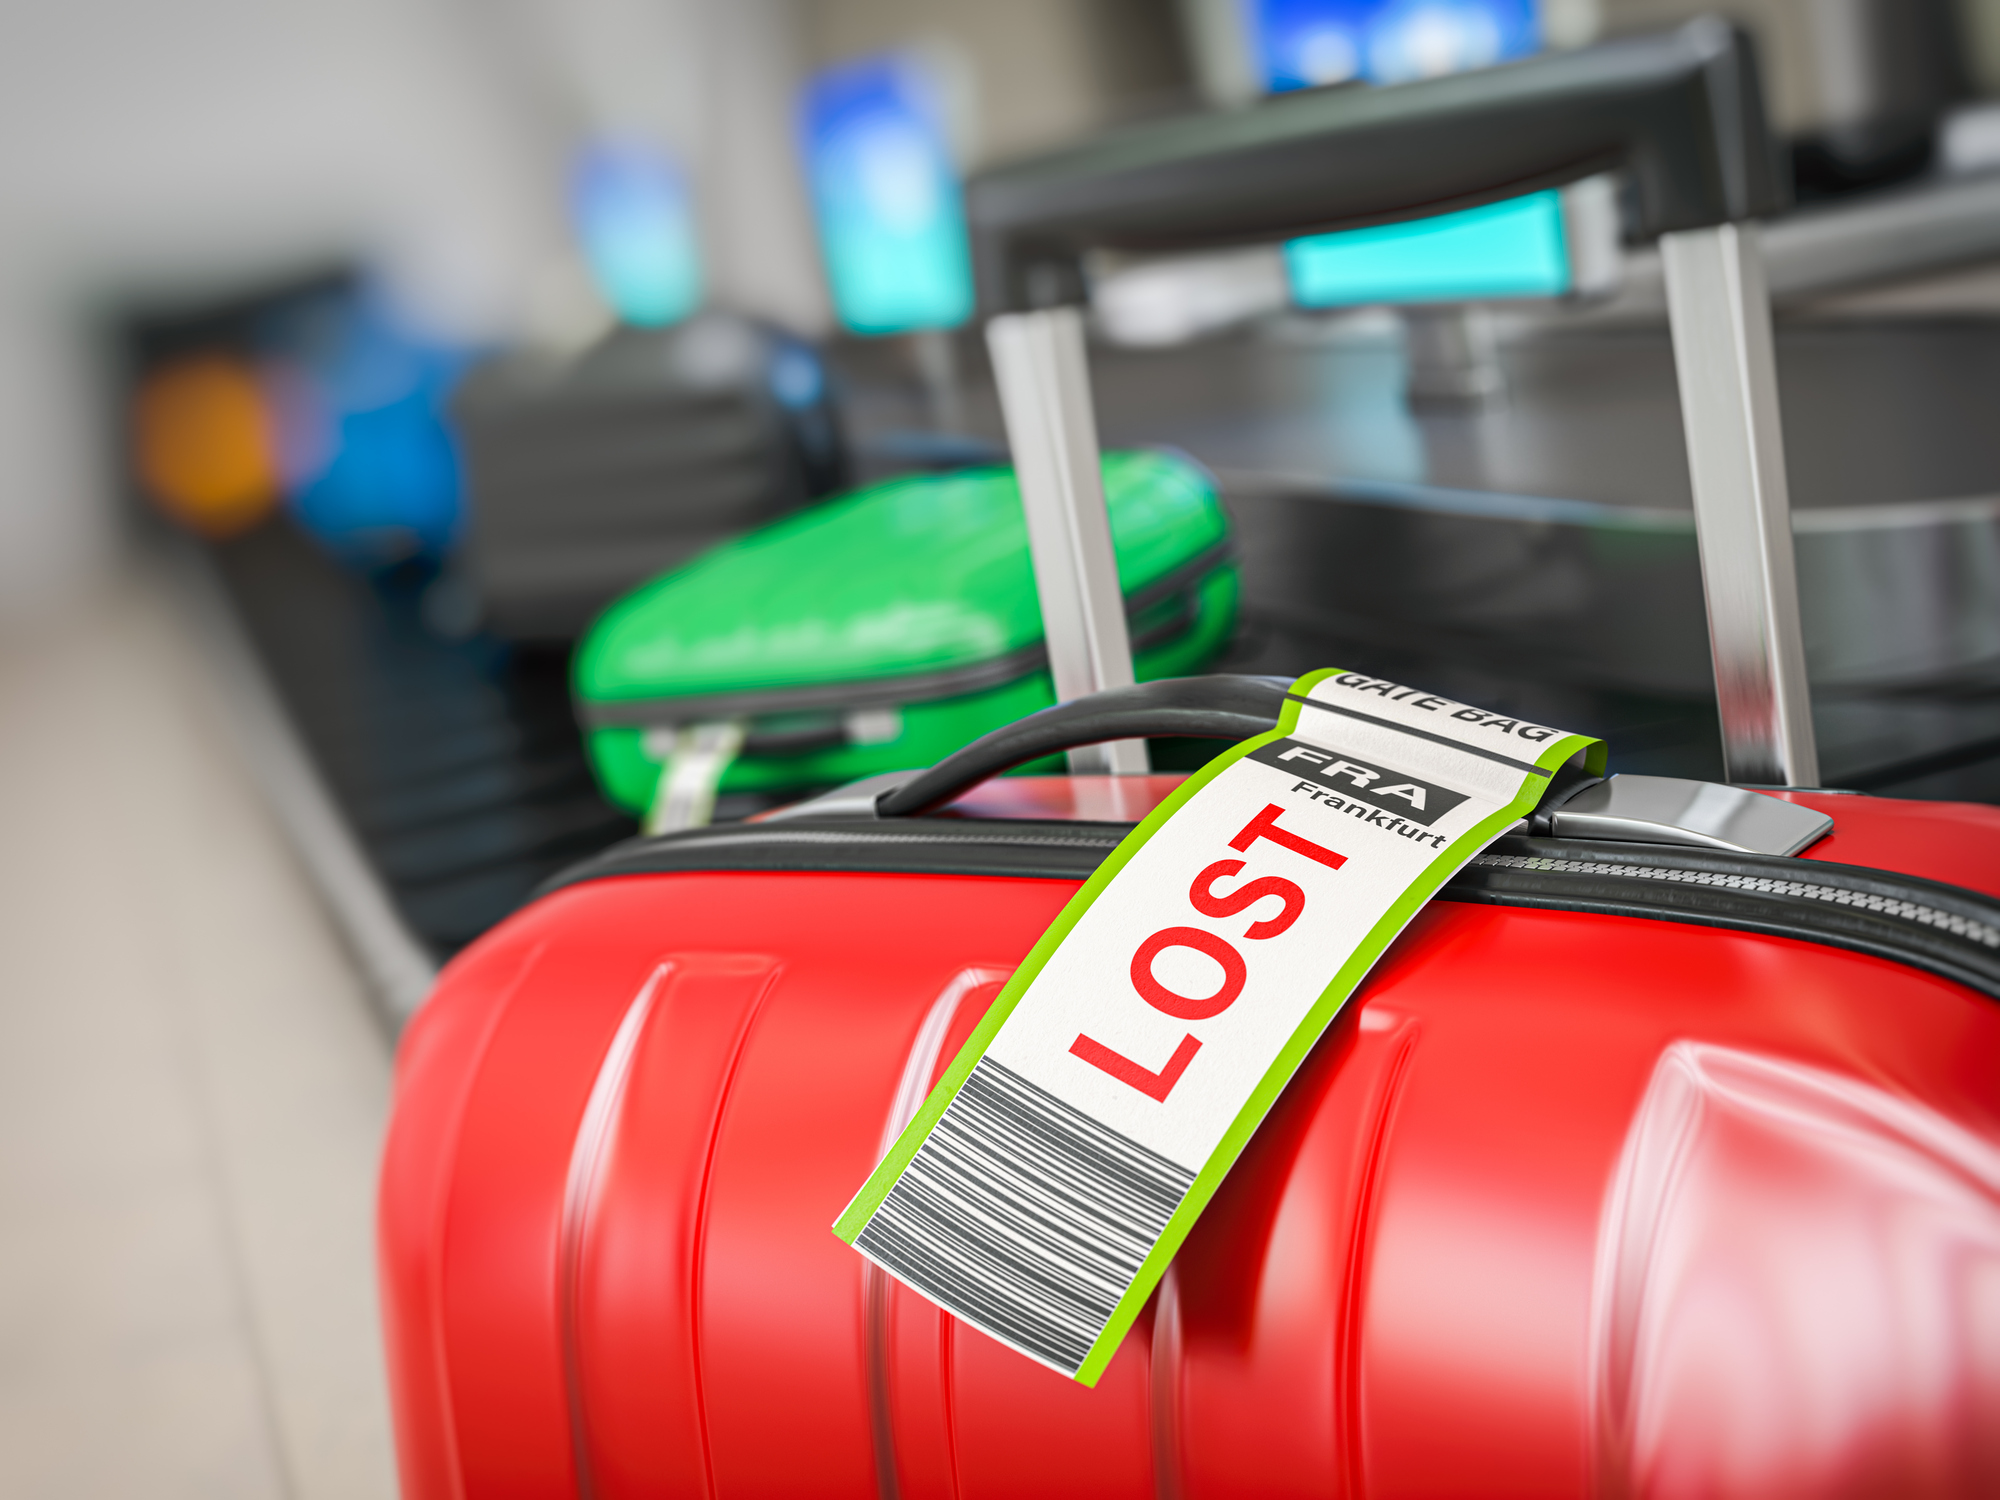 In the foreground is a suitcase with a bag tag that says "LOST", in the background more suitcases are traveling on a baggage carousel.